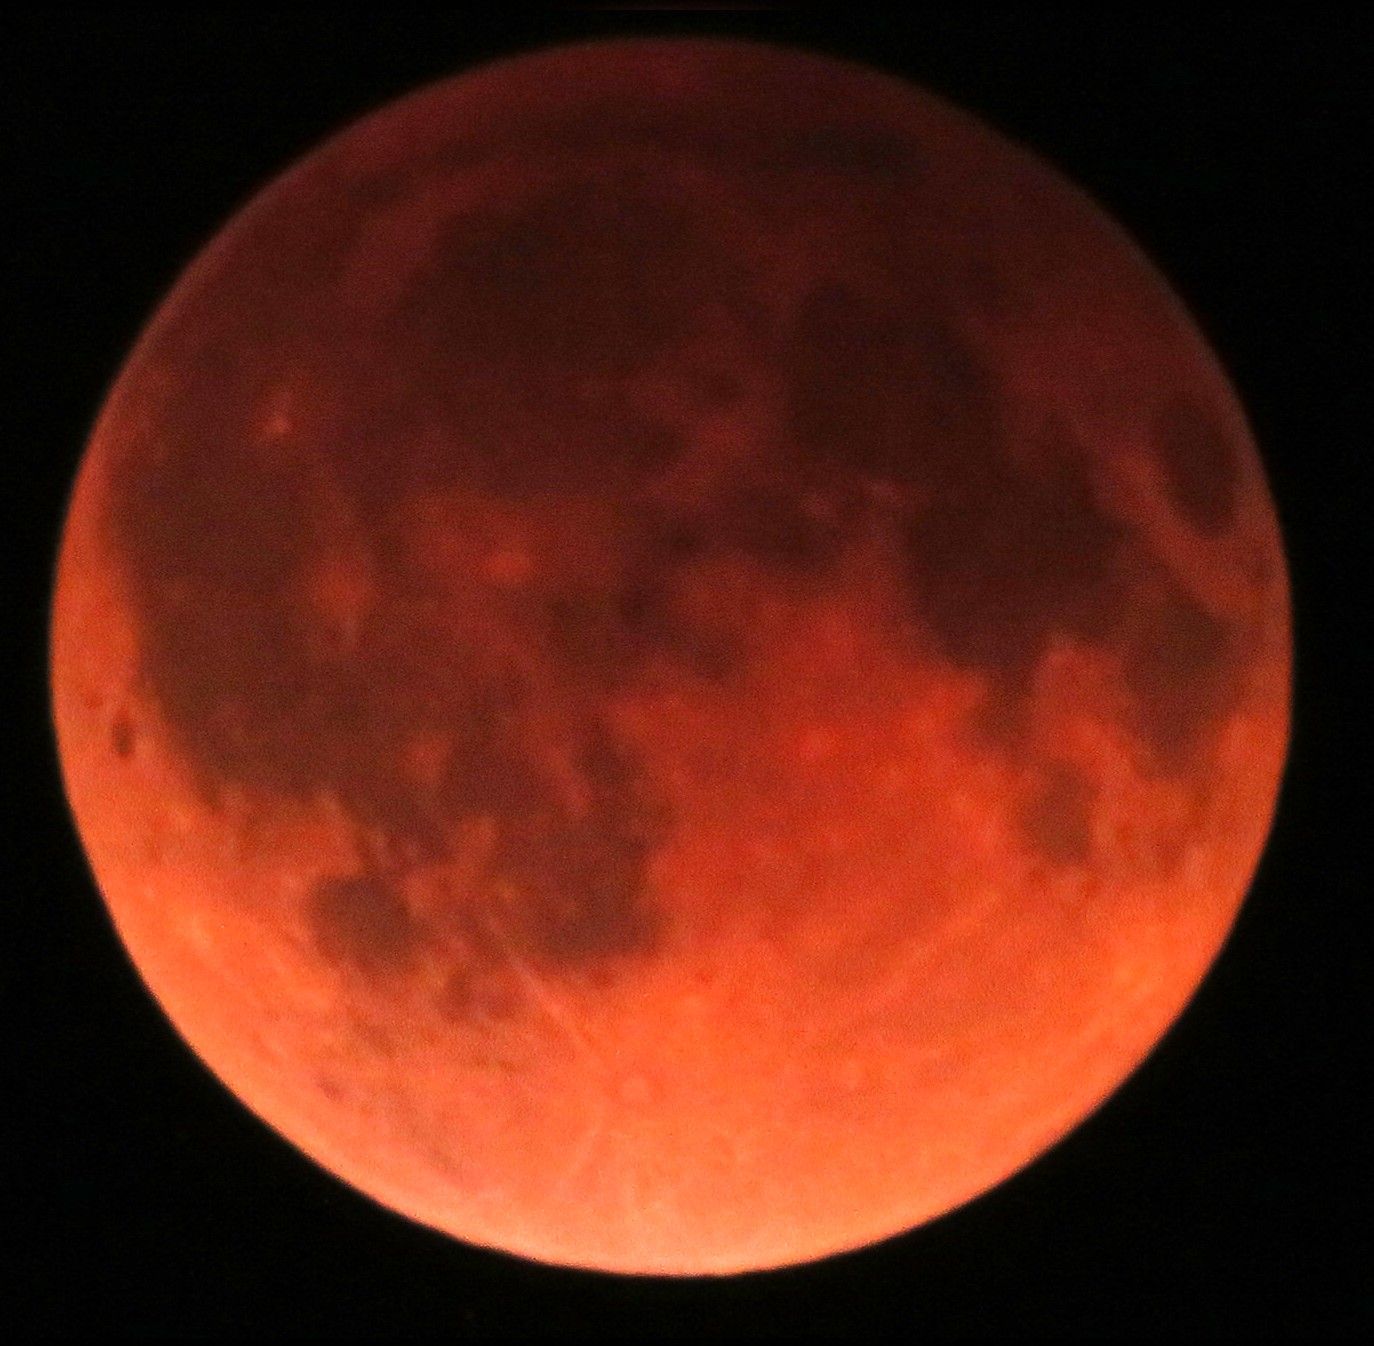 Experience a total lunar eclipse and ‘blood moon’ this Sunday night